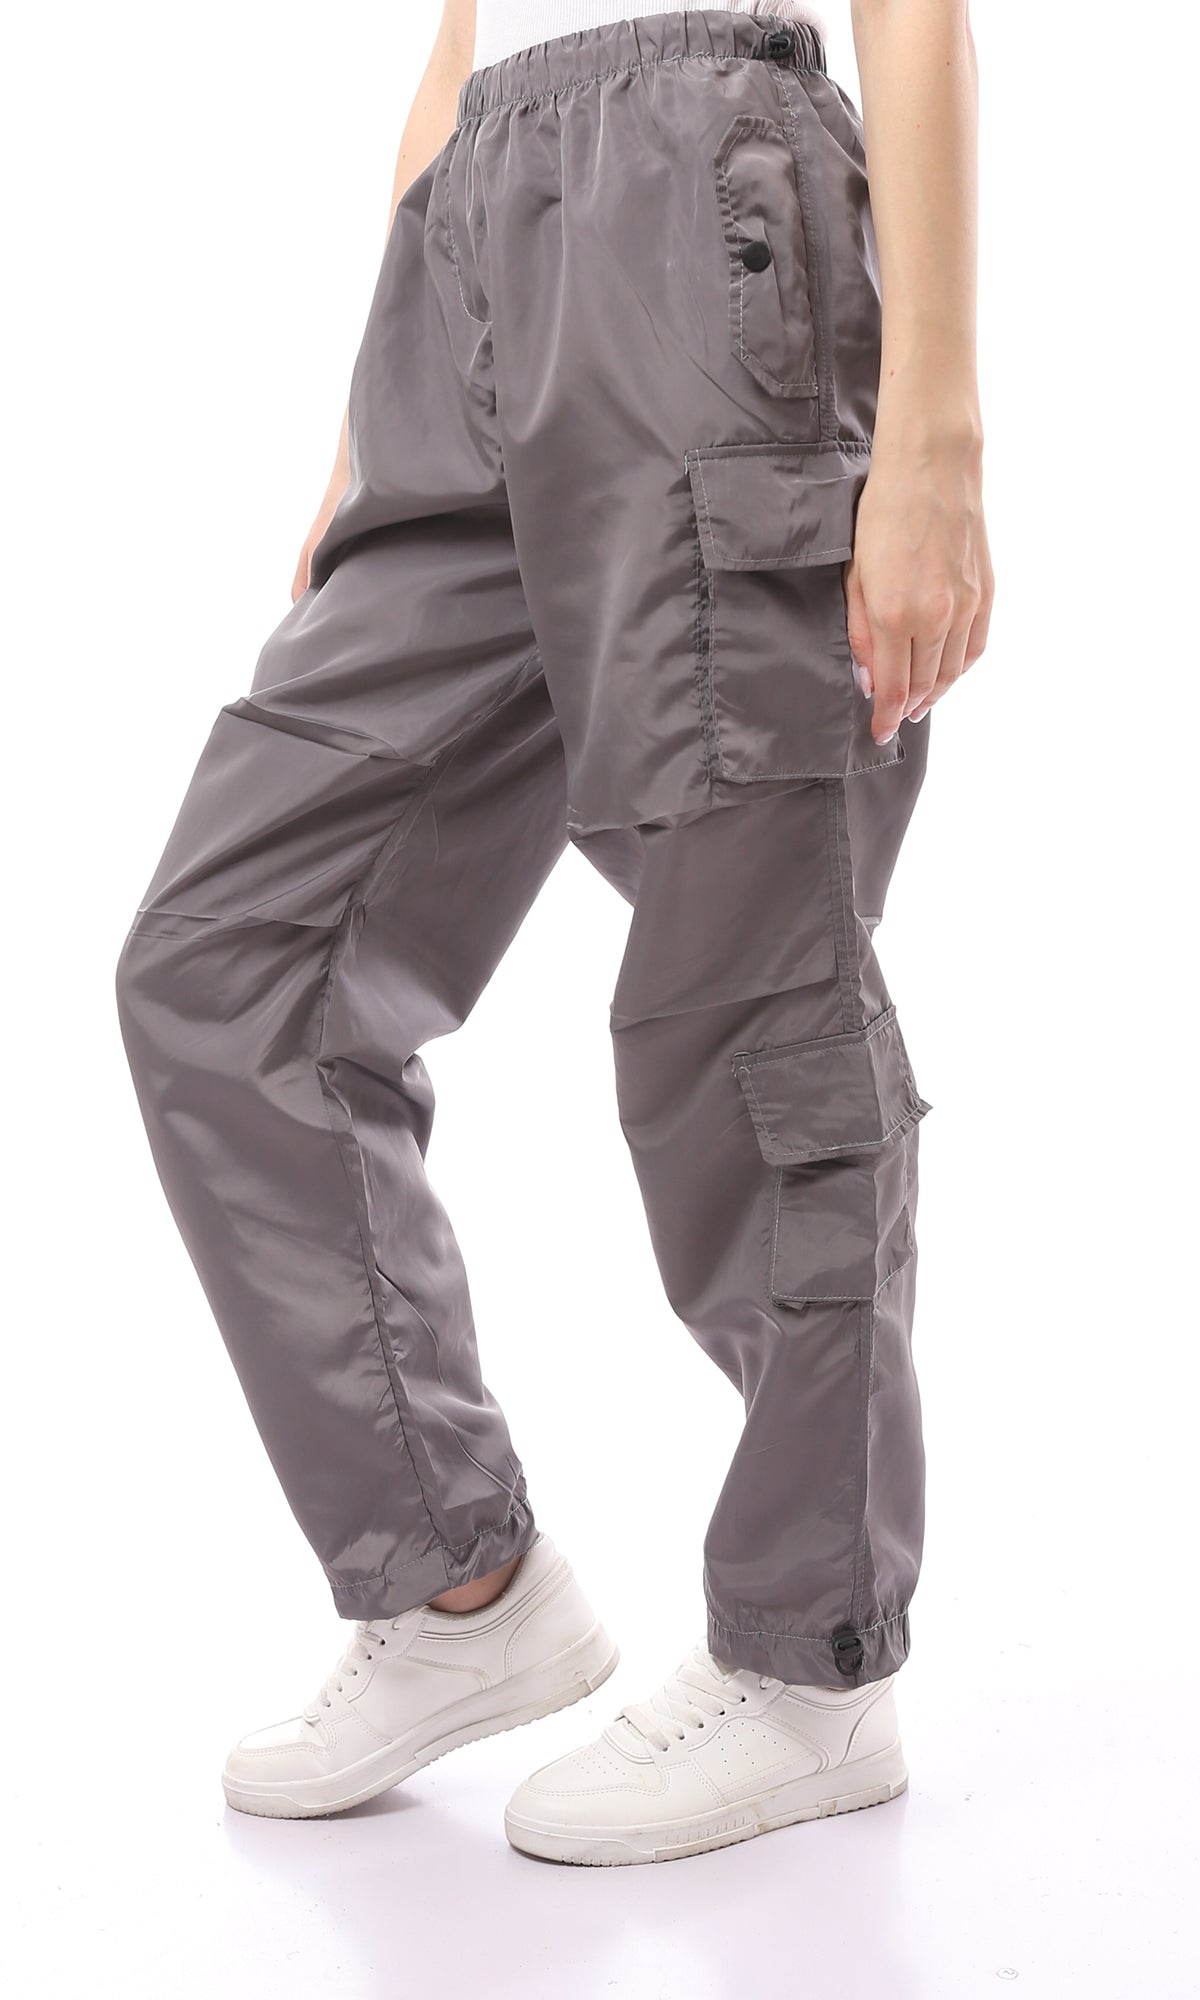 O170601 Dark Grey Waterproof Pants With Patched Pockets